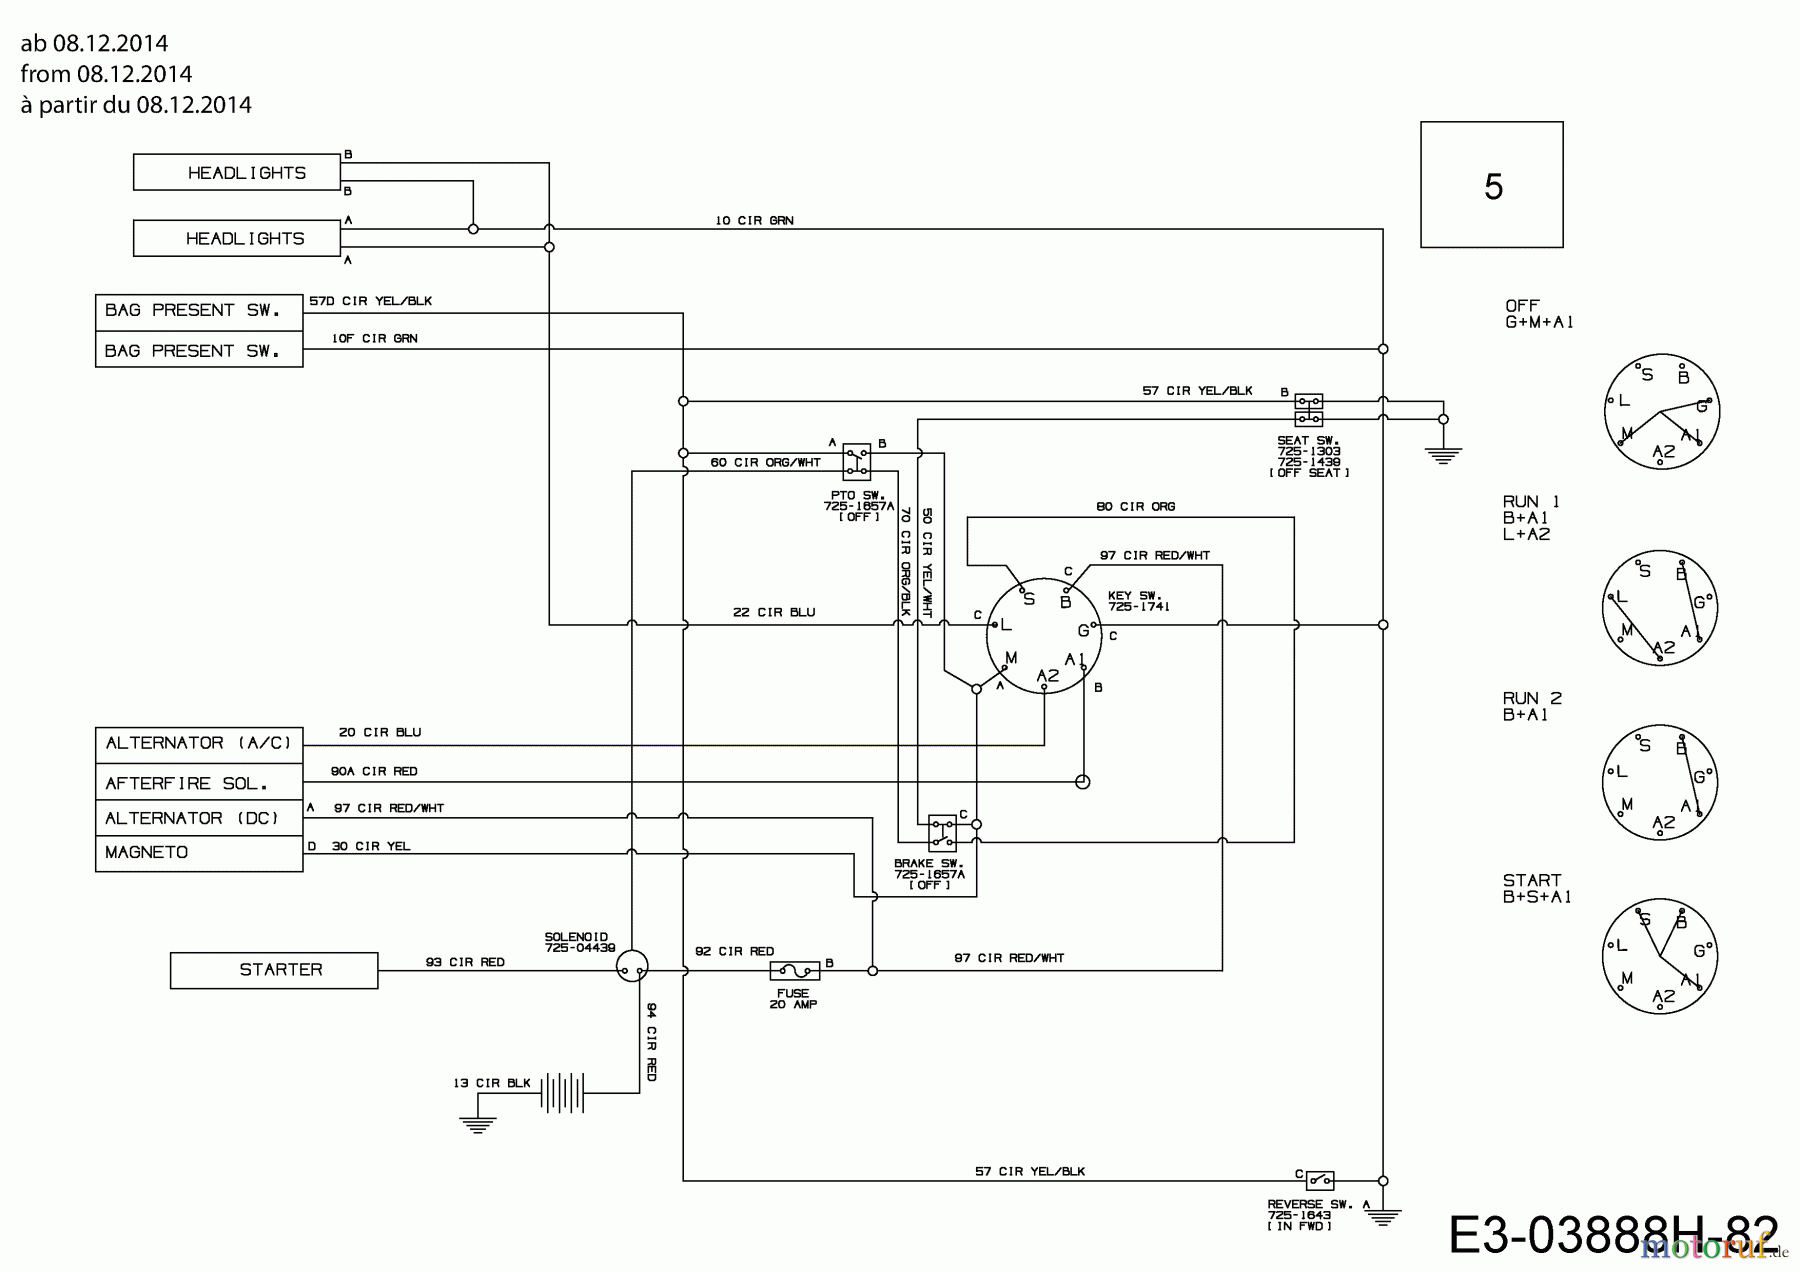  Black Edition Lawn tractors 140-92 13H2777E615  (2015) Wiring diagram from 08.12.2014